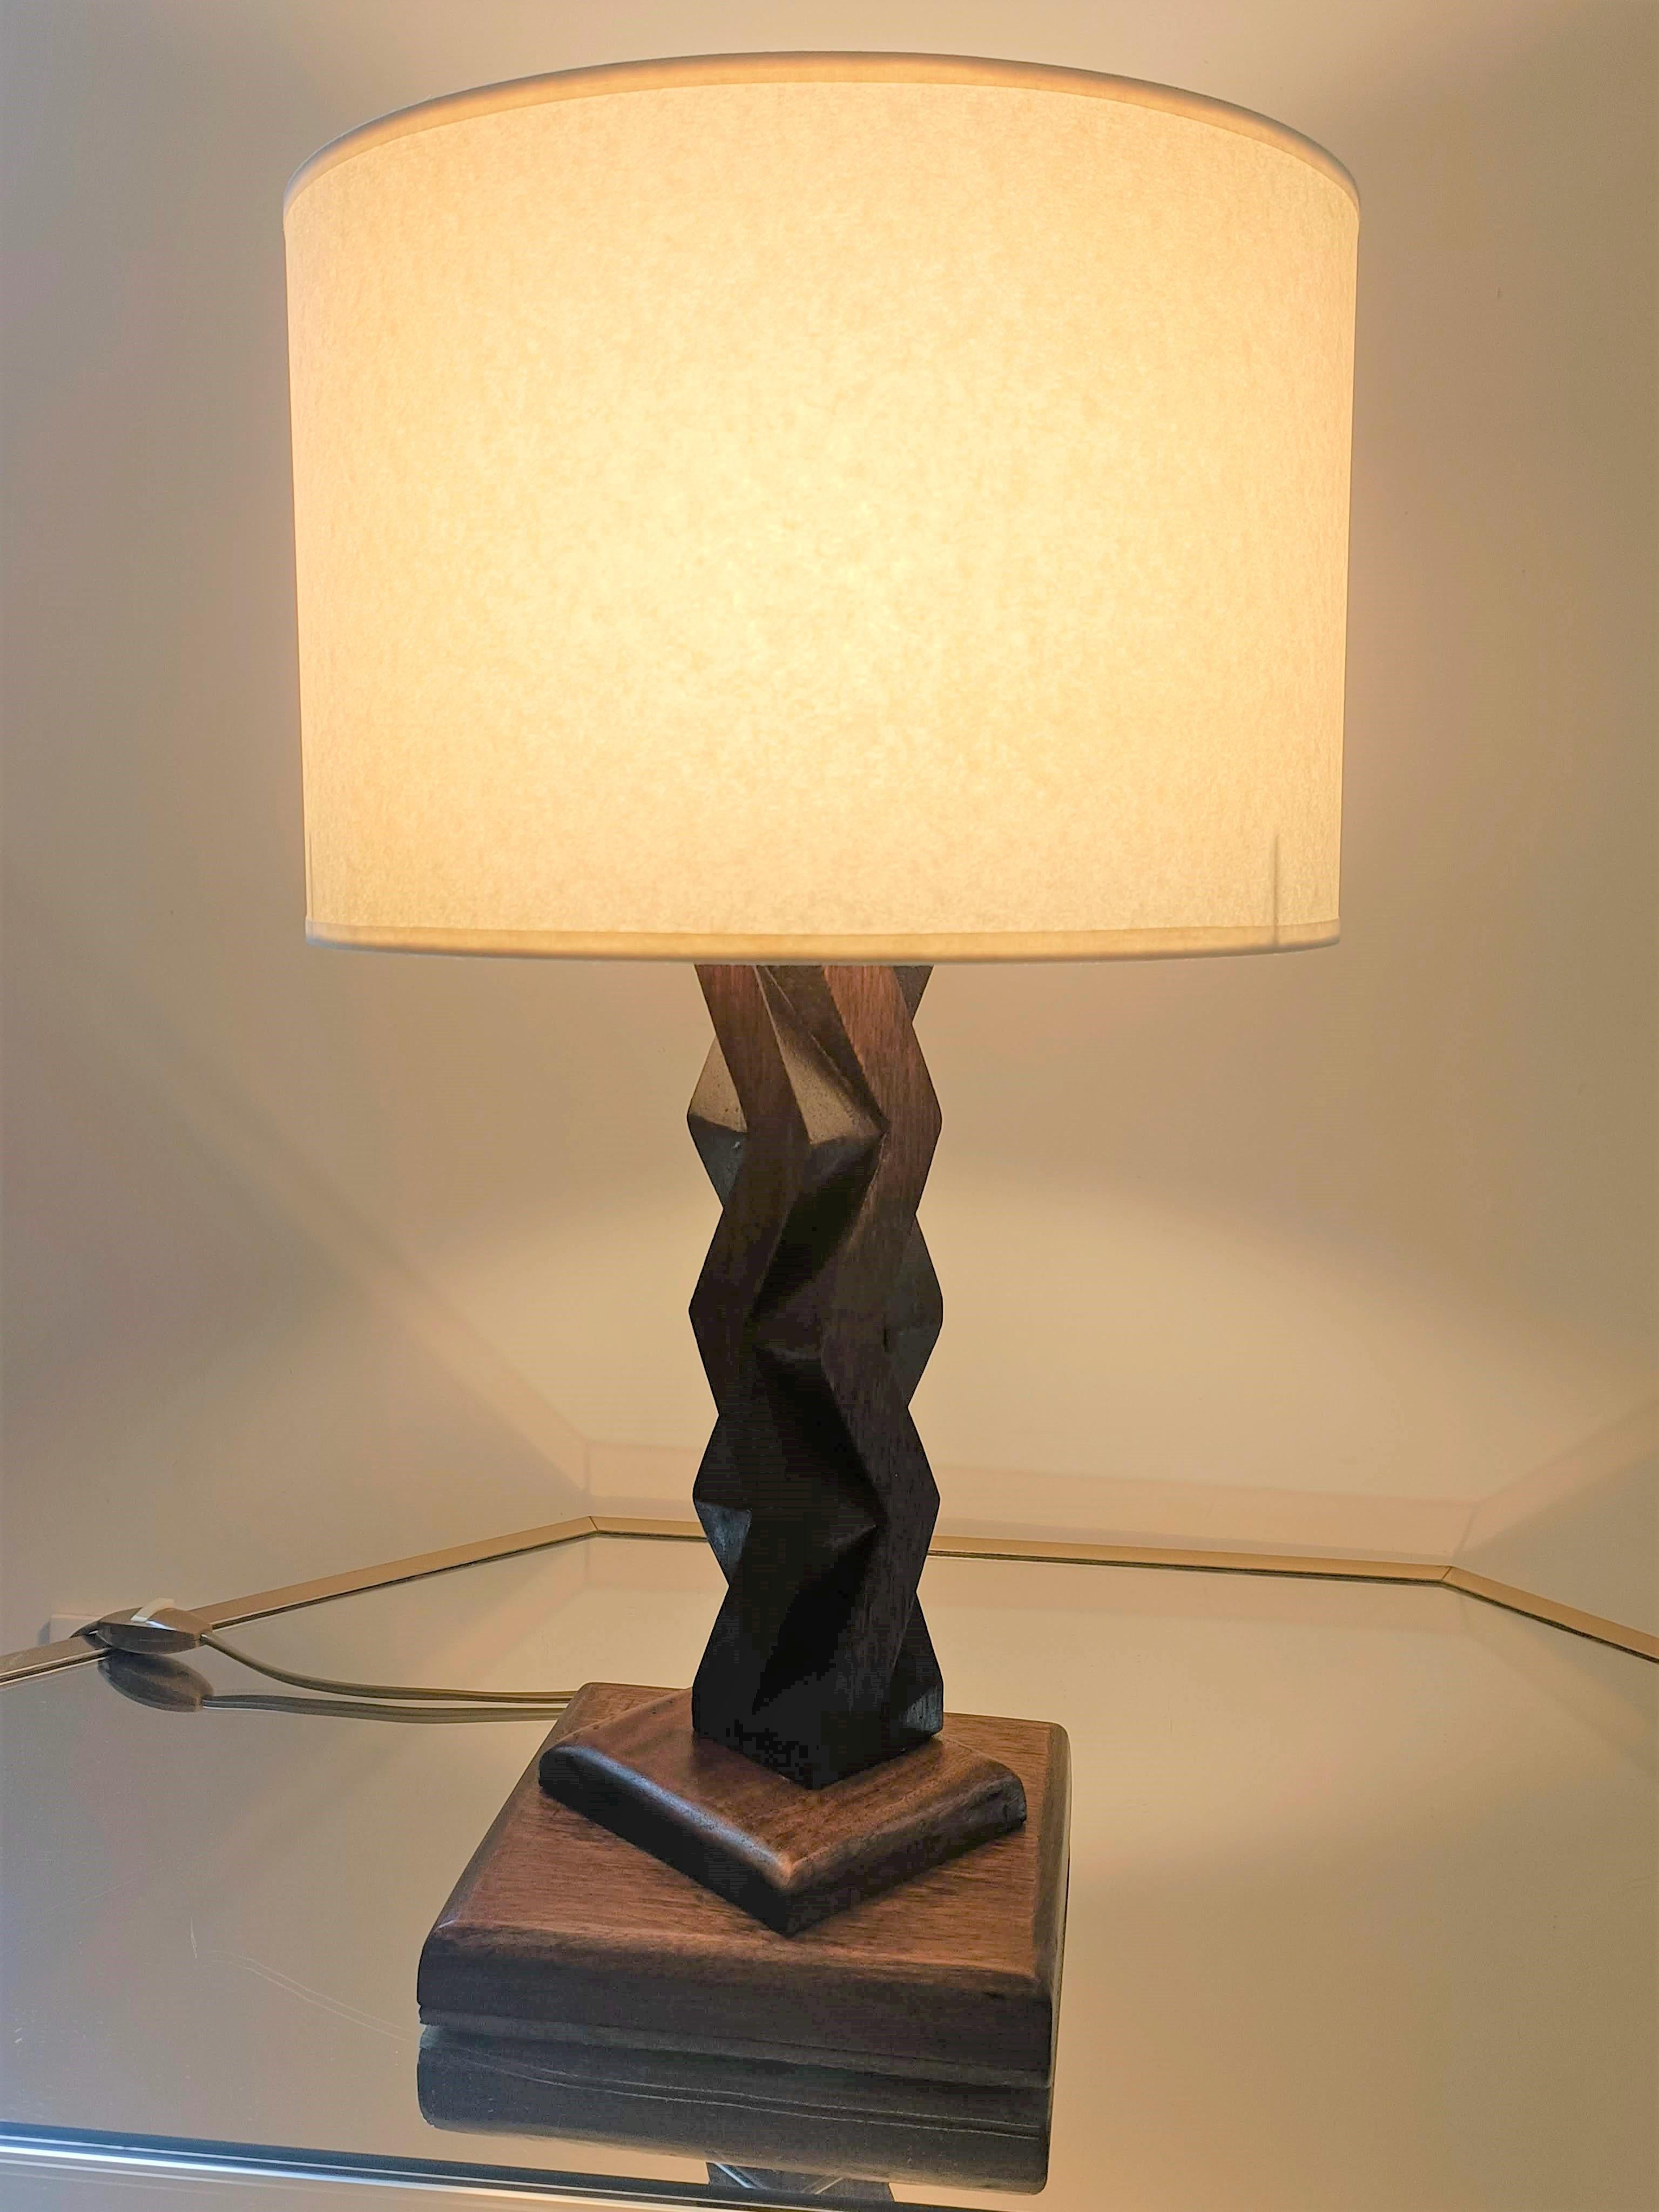 Wooden sculpture lamp, 1950.
.
France.
.
In the spirit of Constantin Brancusi's sculptures.

In a perfect state,
Lampshade almost new,
Superb patina.
.
Dimensions :

Total height : 51 cm
Shade height : 20 cm 
Shade diameter : 30 cm
18